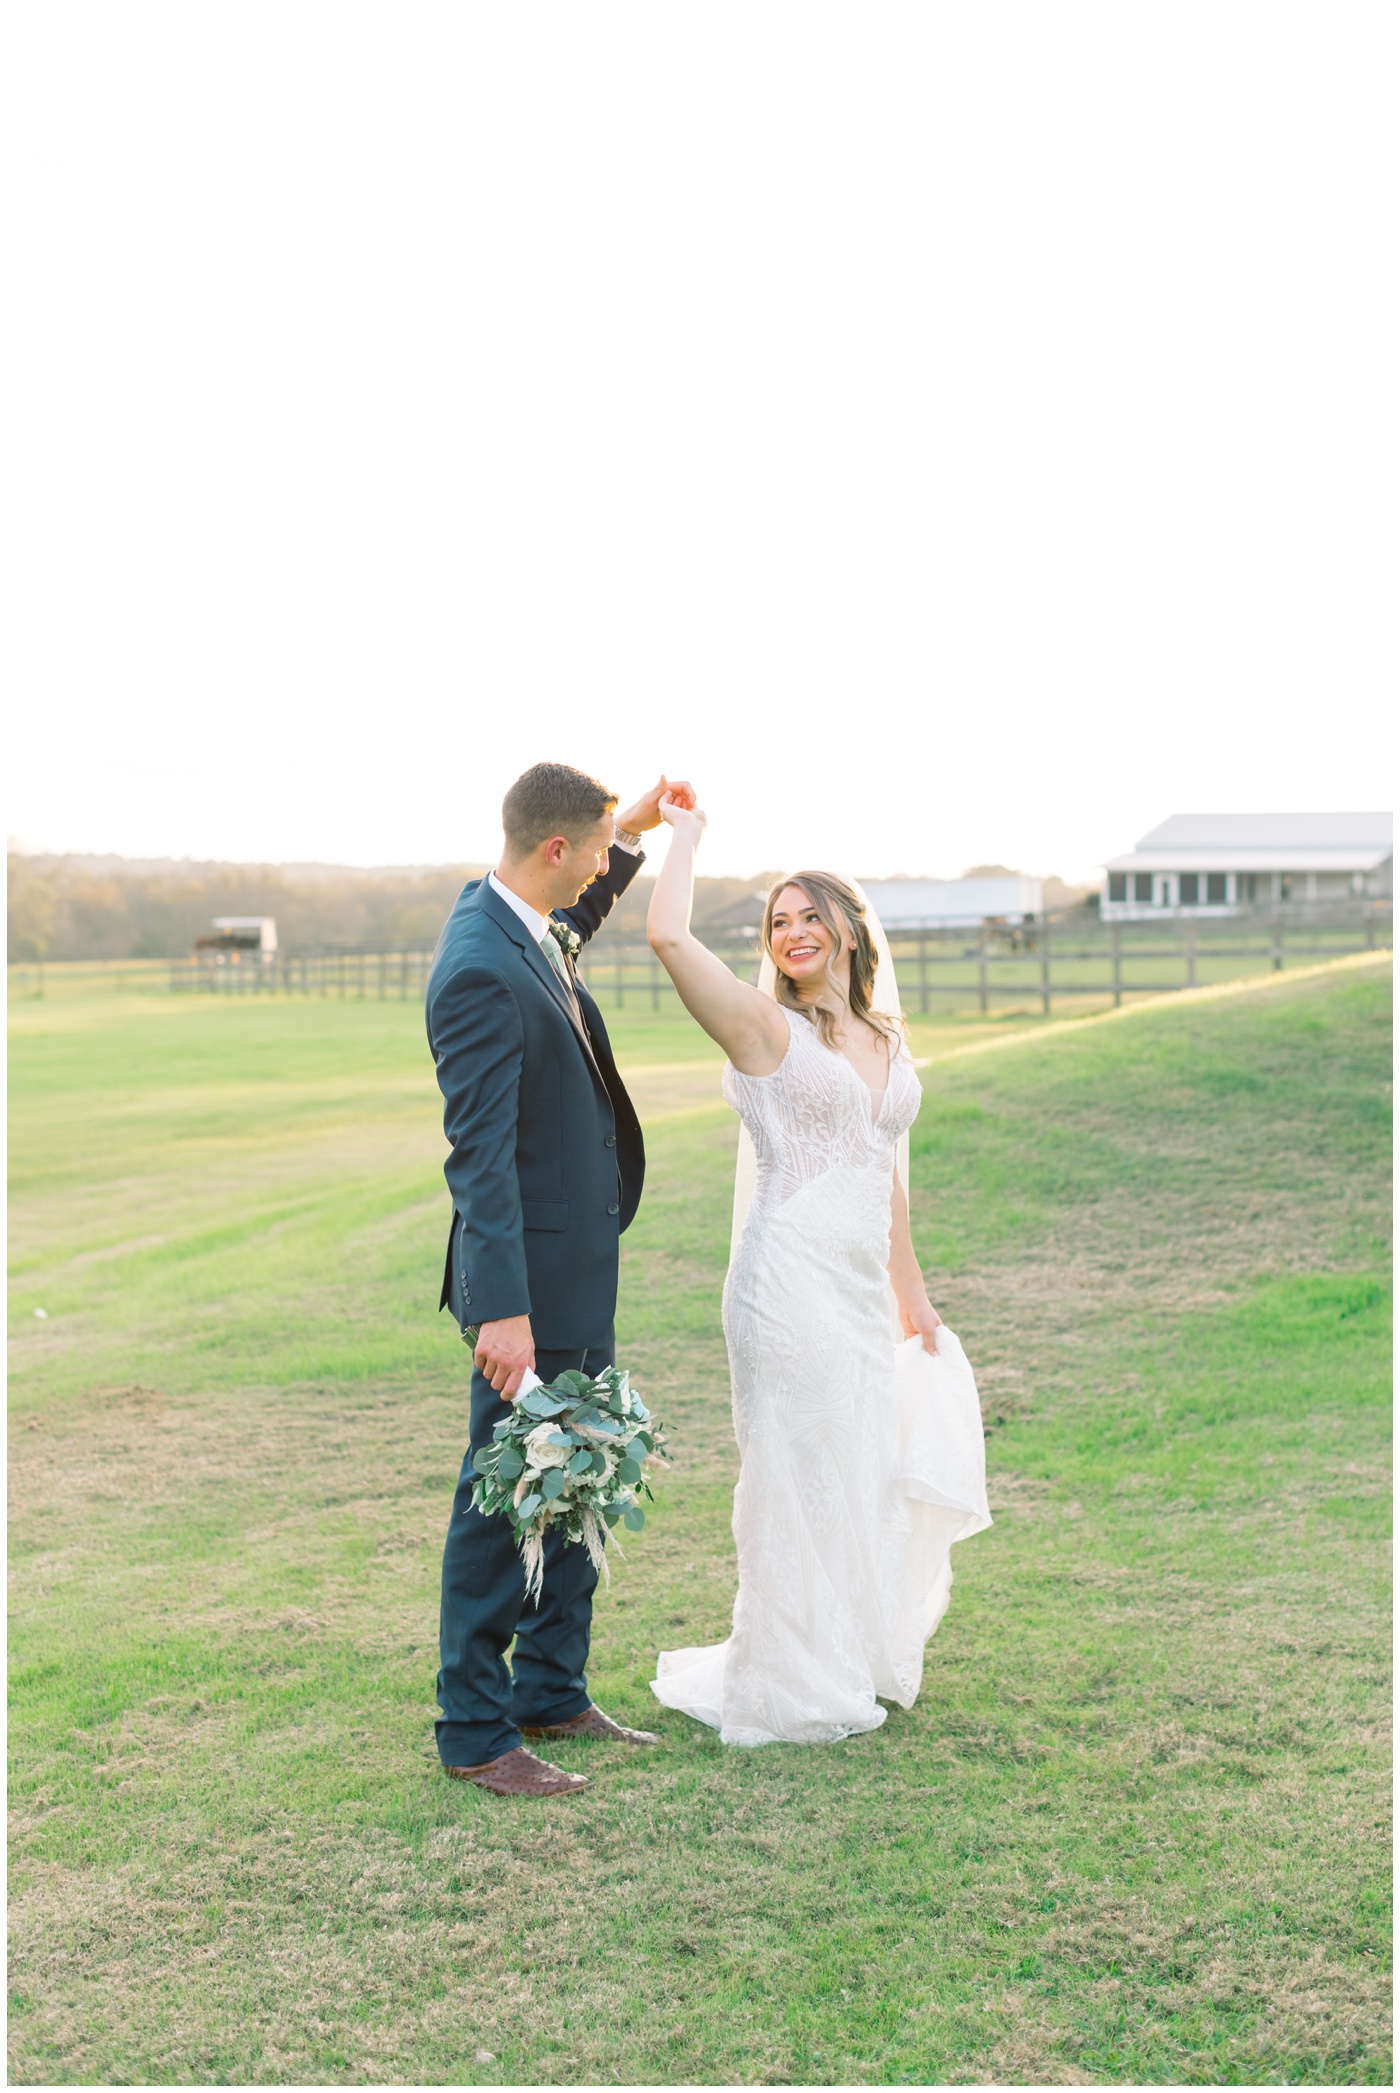 Texas farmhouse wedding | the groom twirls his bride and admires her 